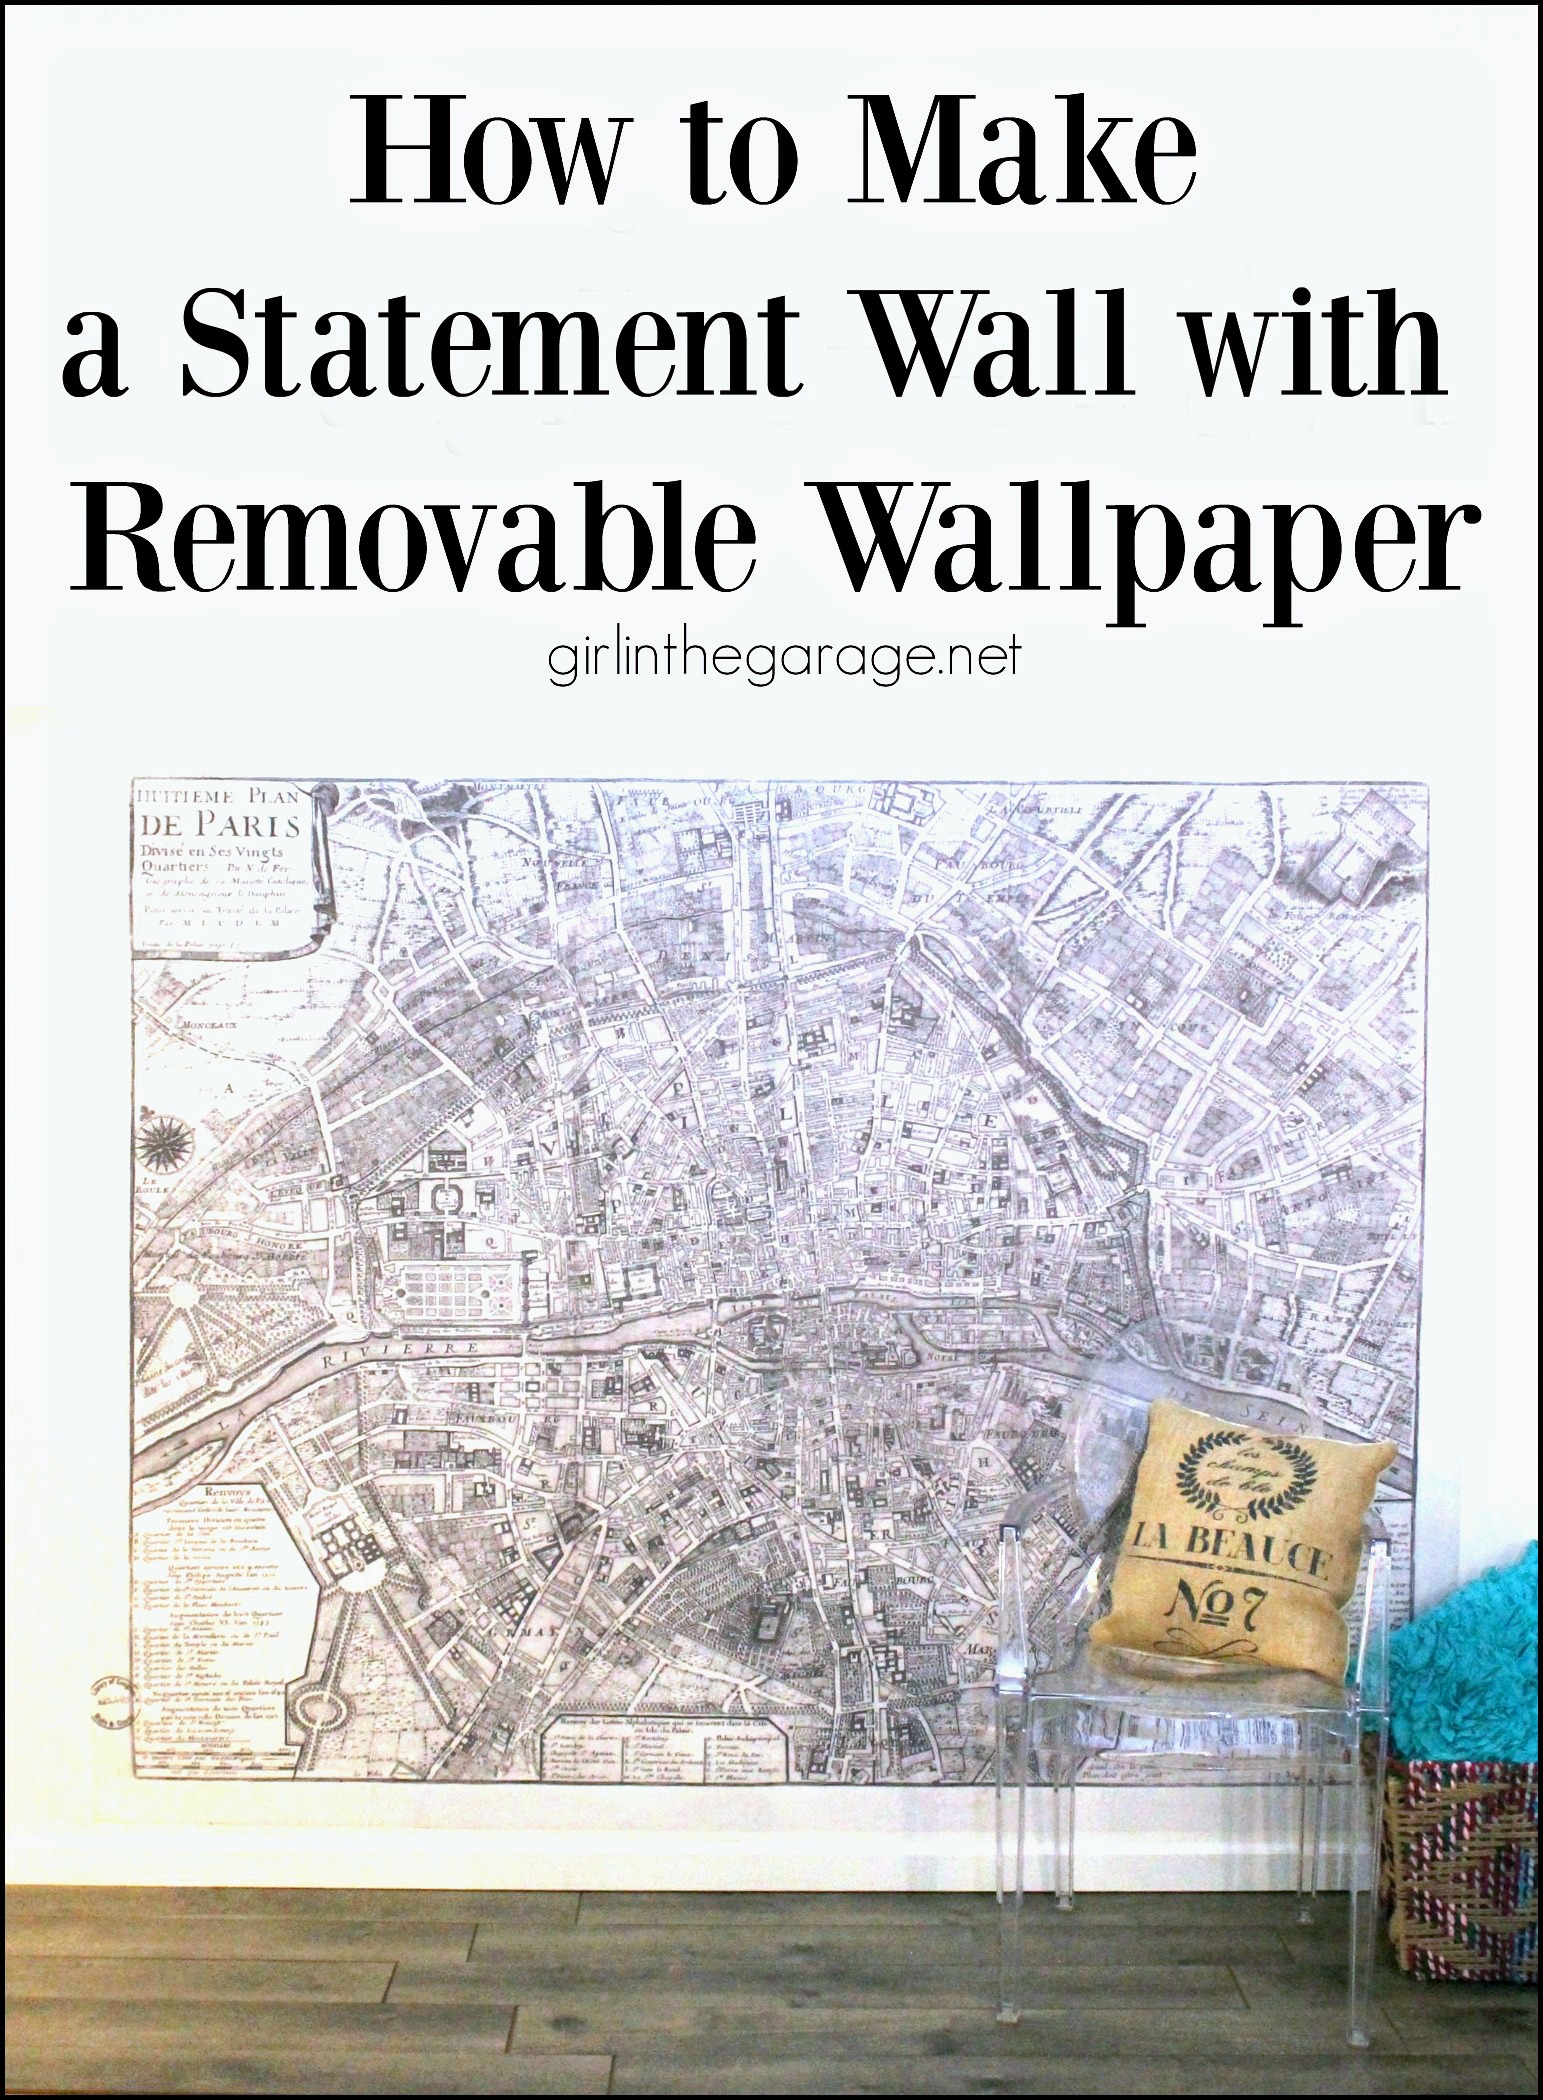 How To Make A Statement Wall With Removable Wallpaper - Paper - HD Wallpaper 